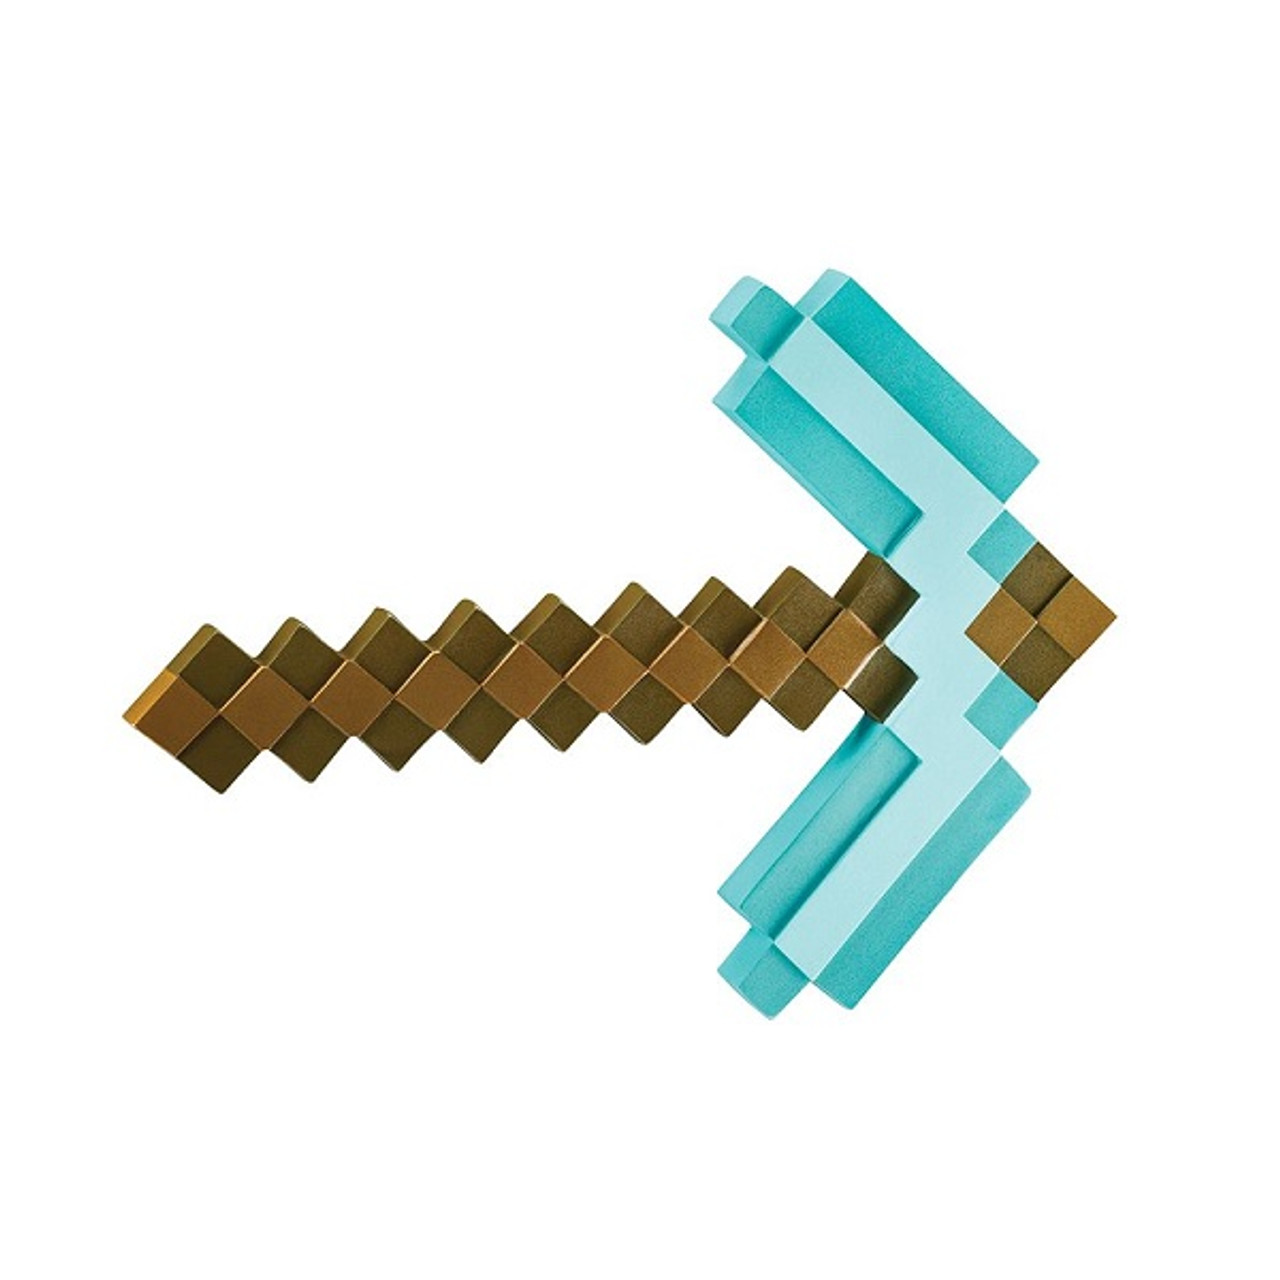 minecraft pickaxe and sword cake